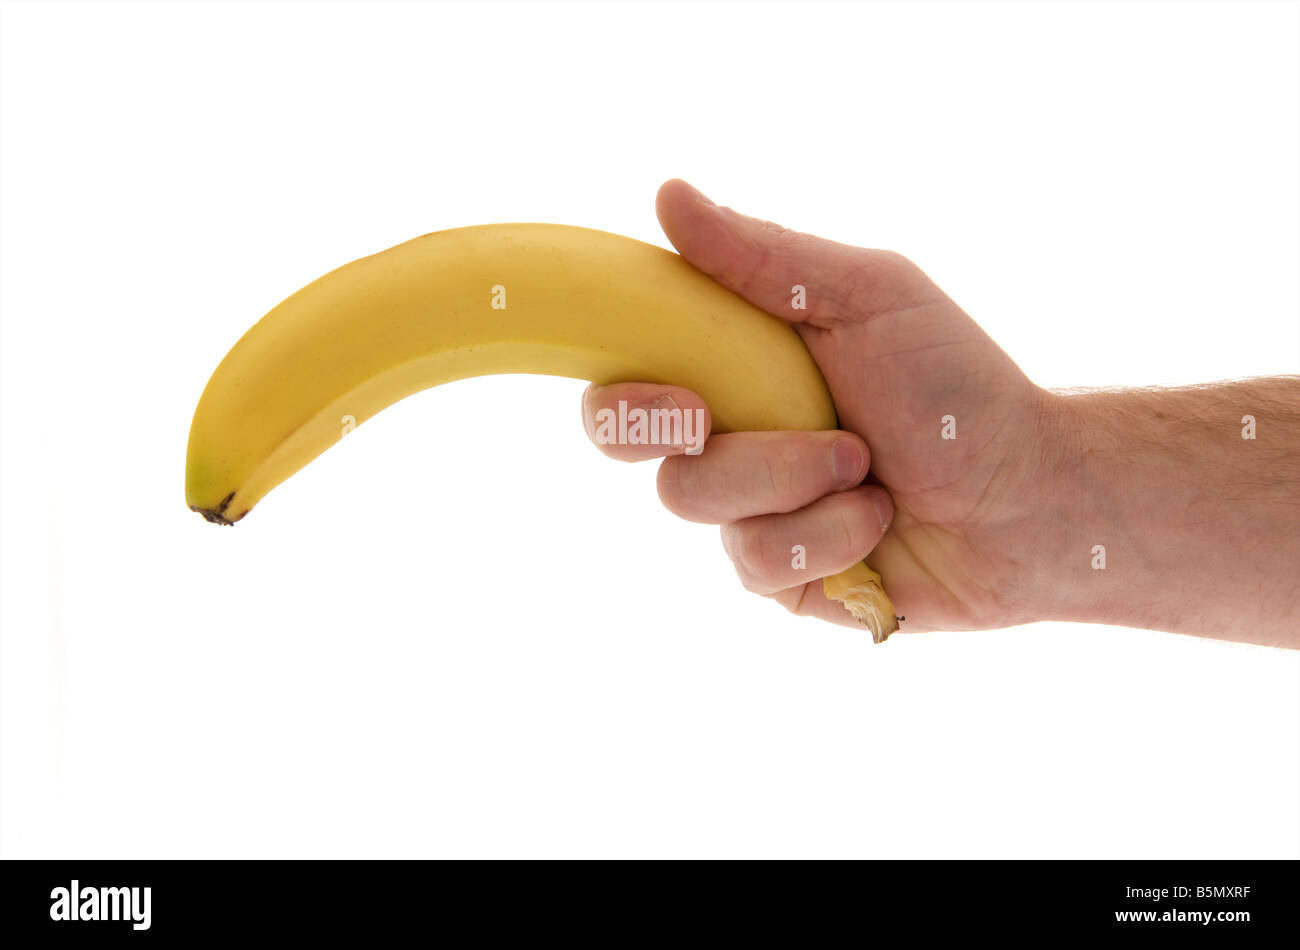 mans male right outstretched hand holding a banana like a gun against a white background Stock Photo